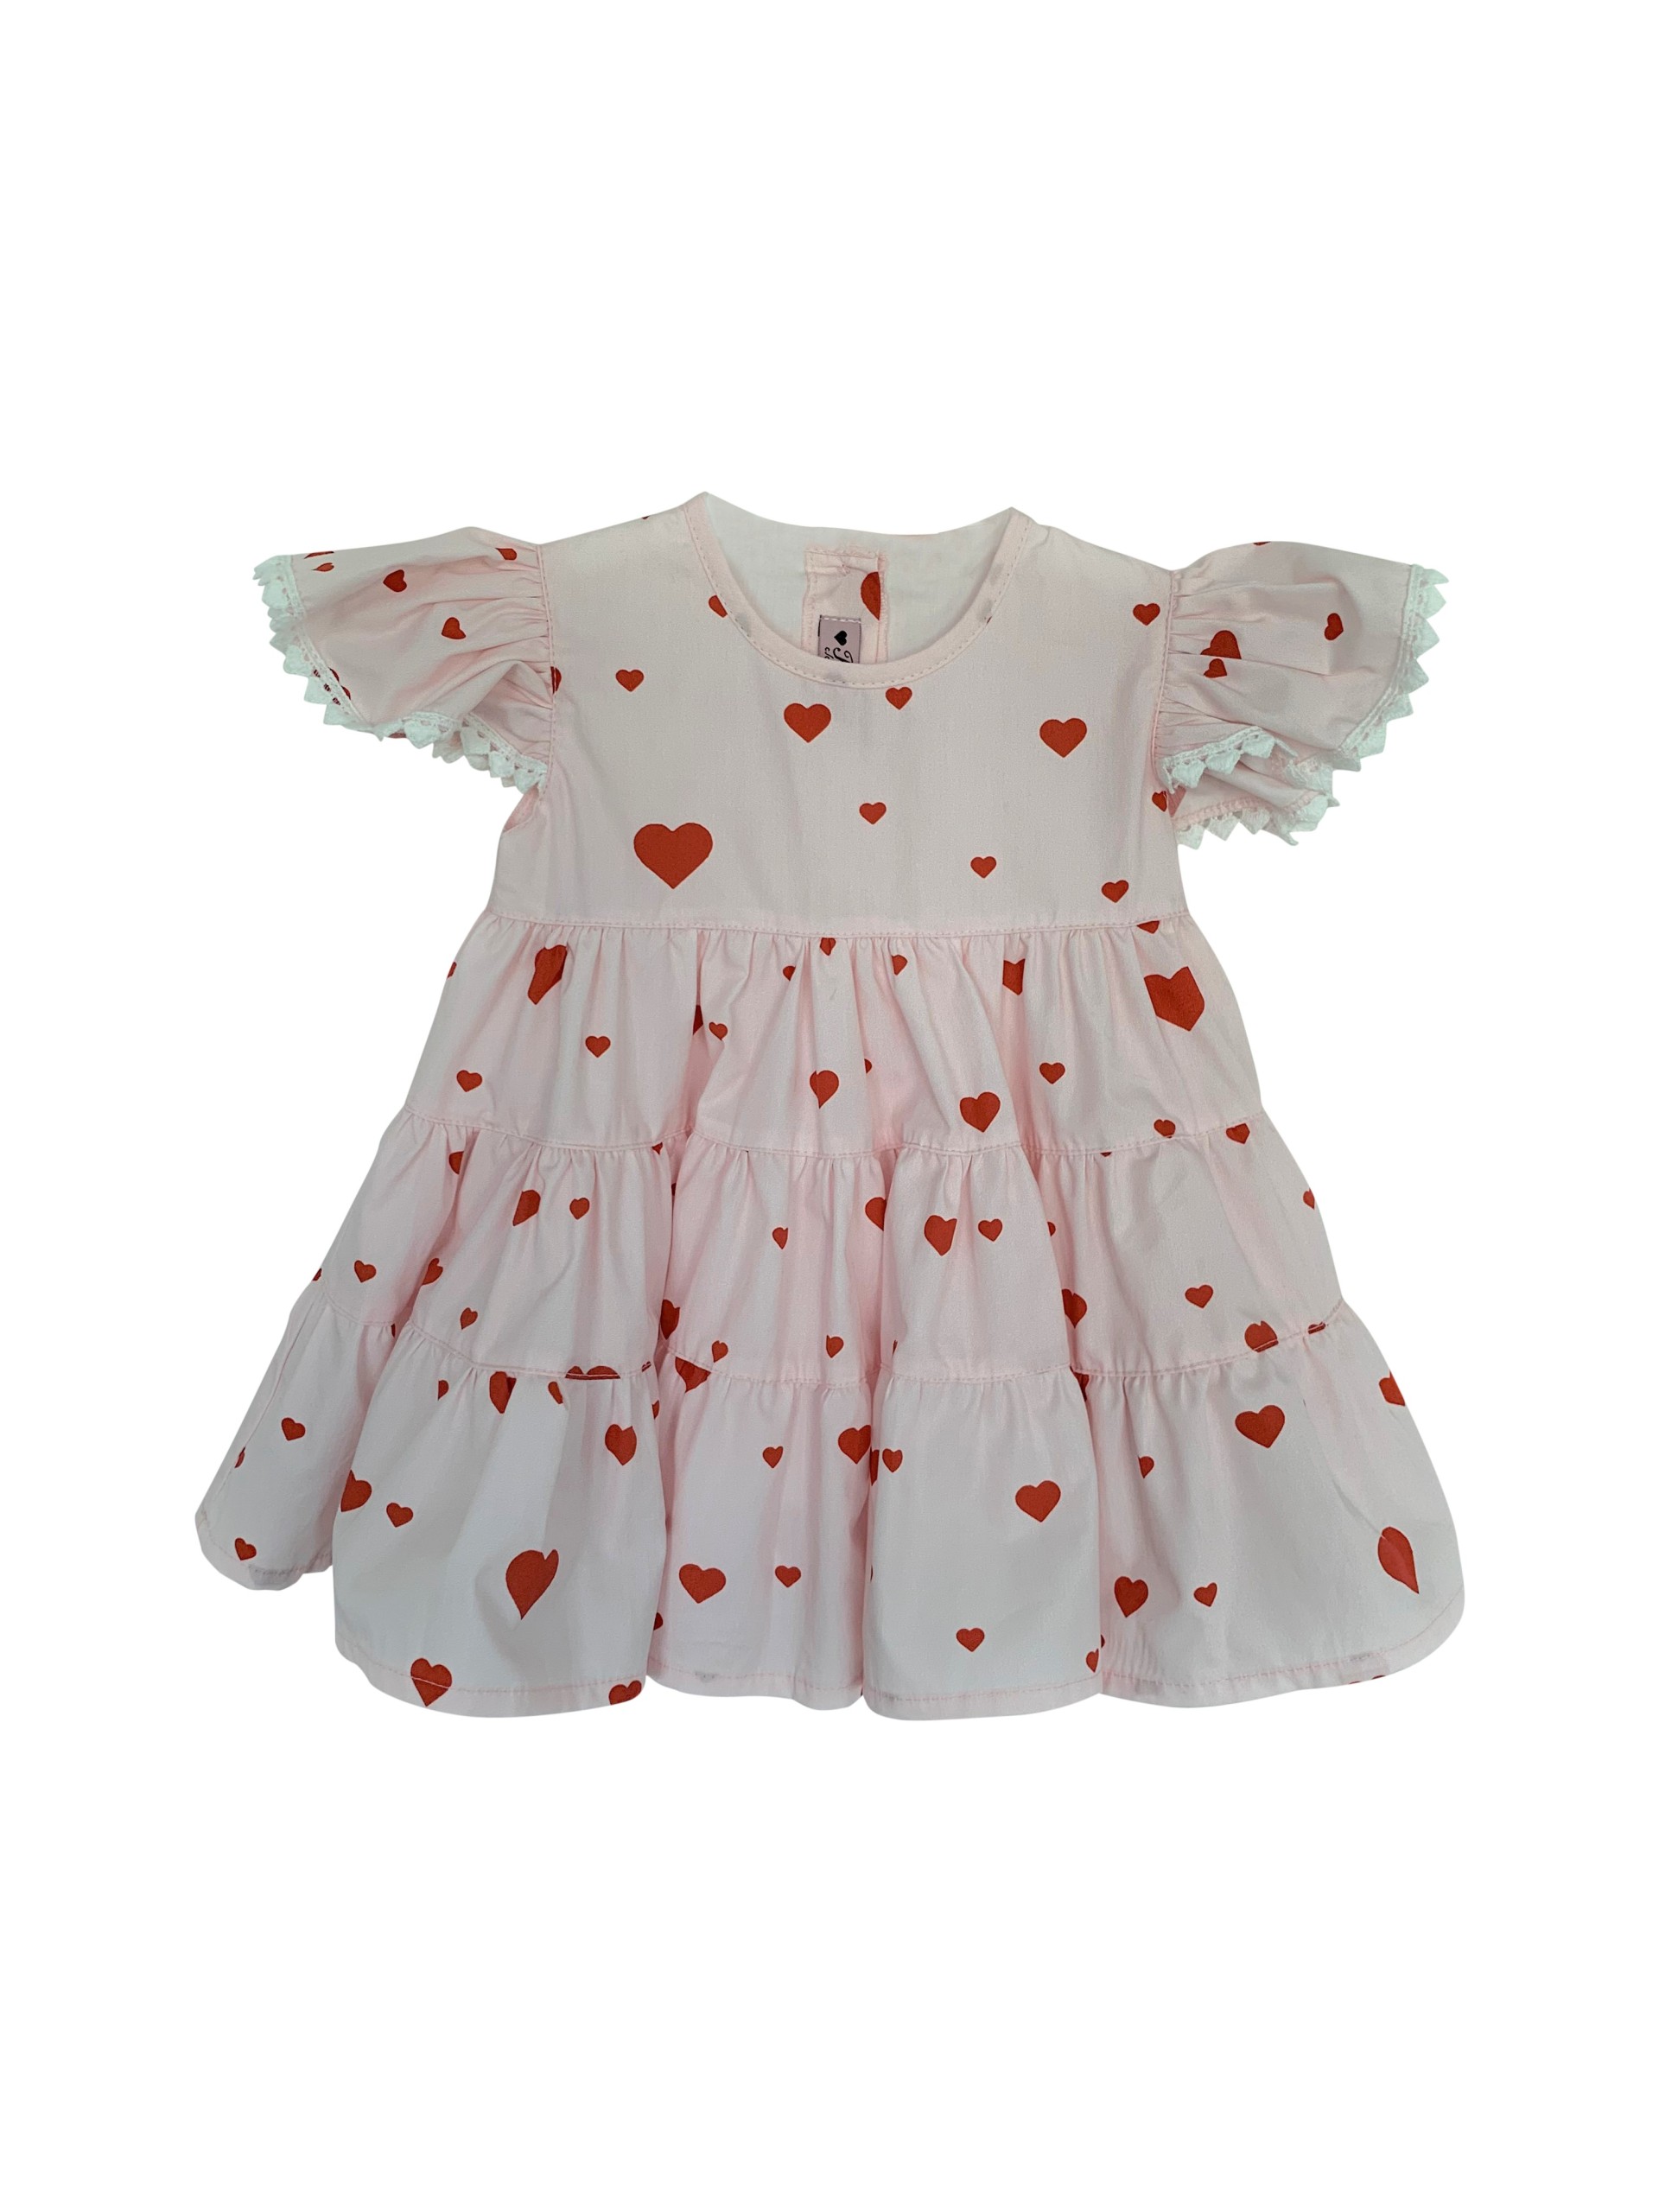 Pink with red hearts bows dress